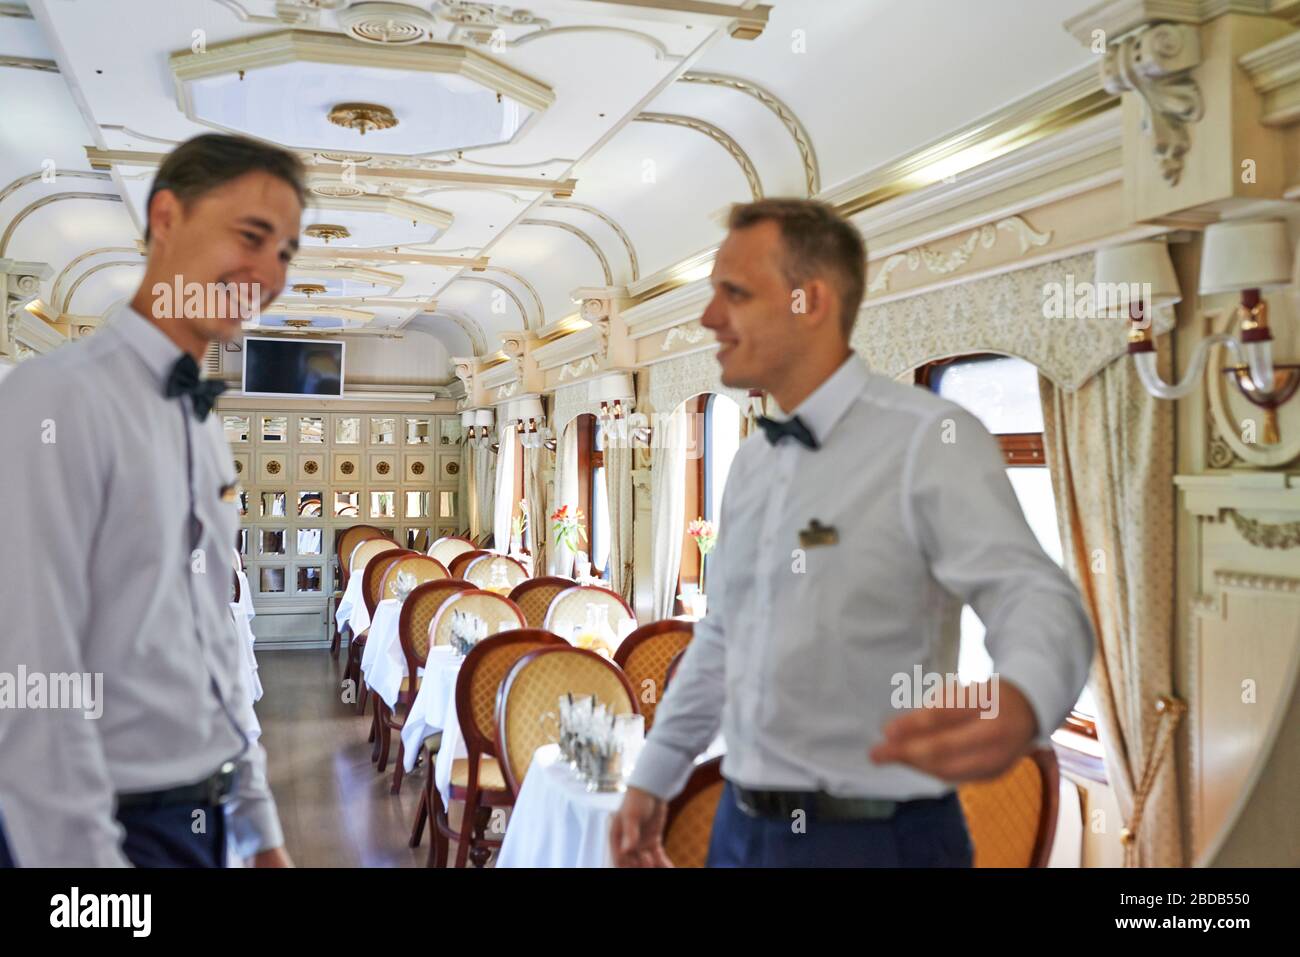 Waiters at work in the restaurant car of the train; food service occupation; dining car; luxury train Stock Photo